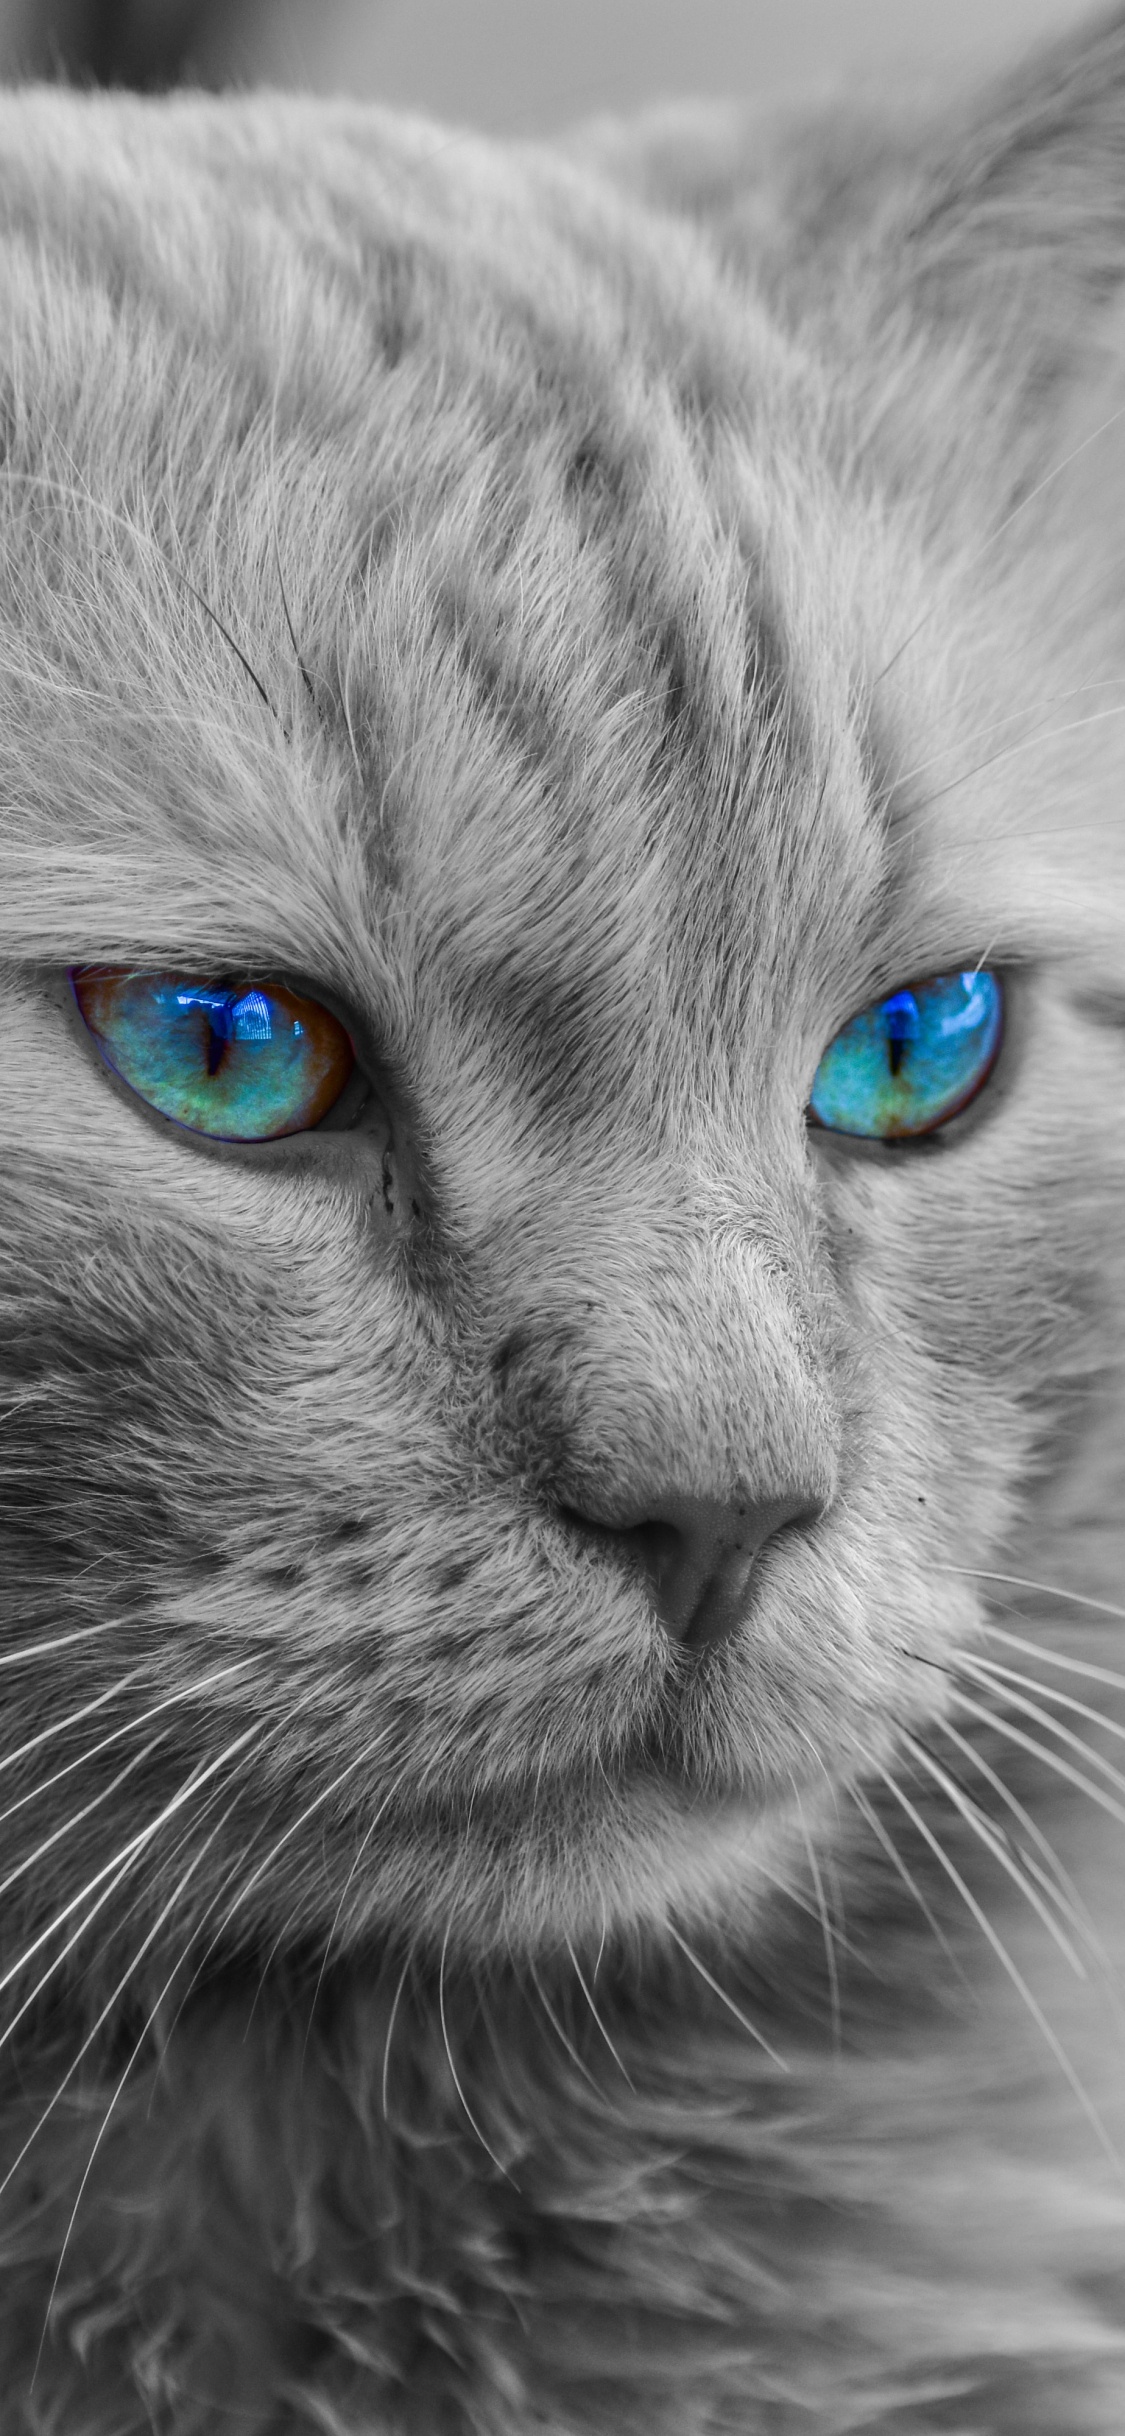 Grayscale Photo of Cat With Blue Eyes. Wallpaper in 1125x2436 Resolution